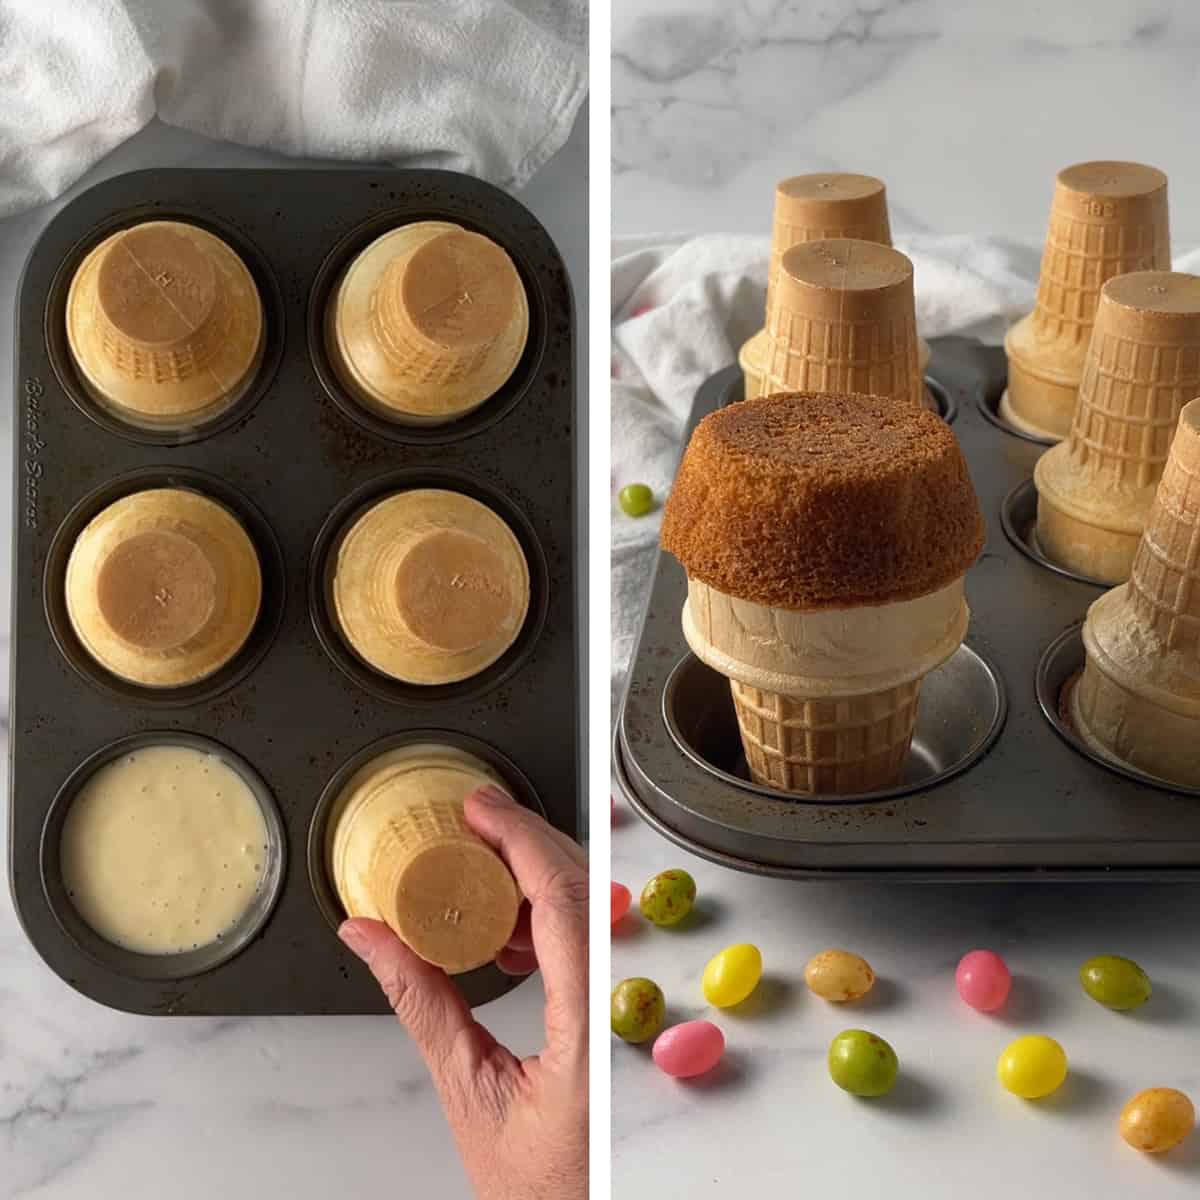 Cupcakes baked with ice cream cones.